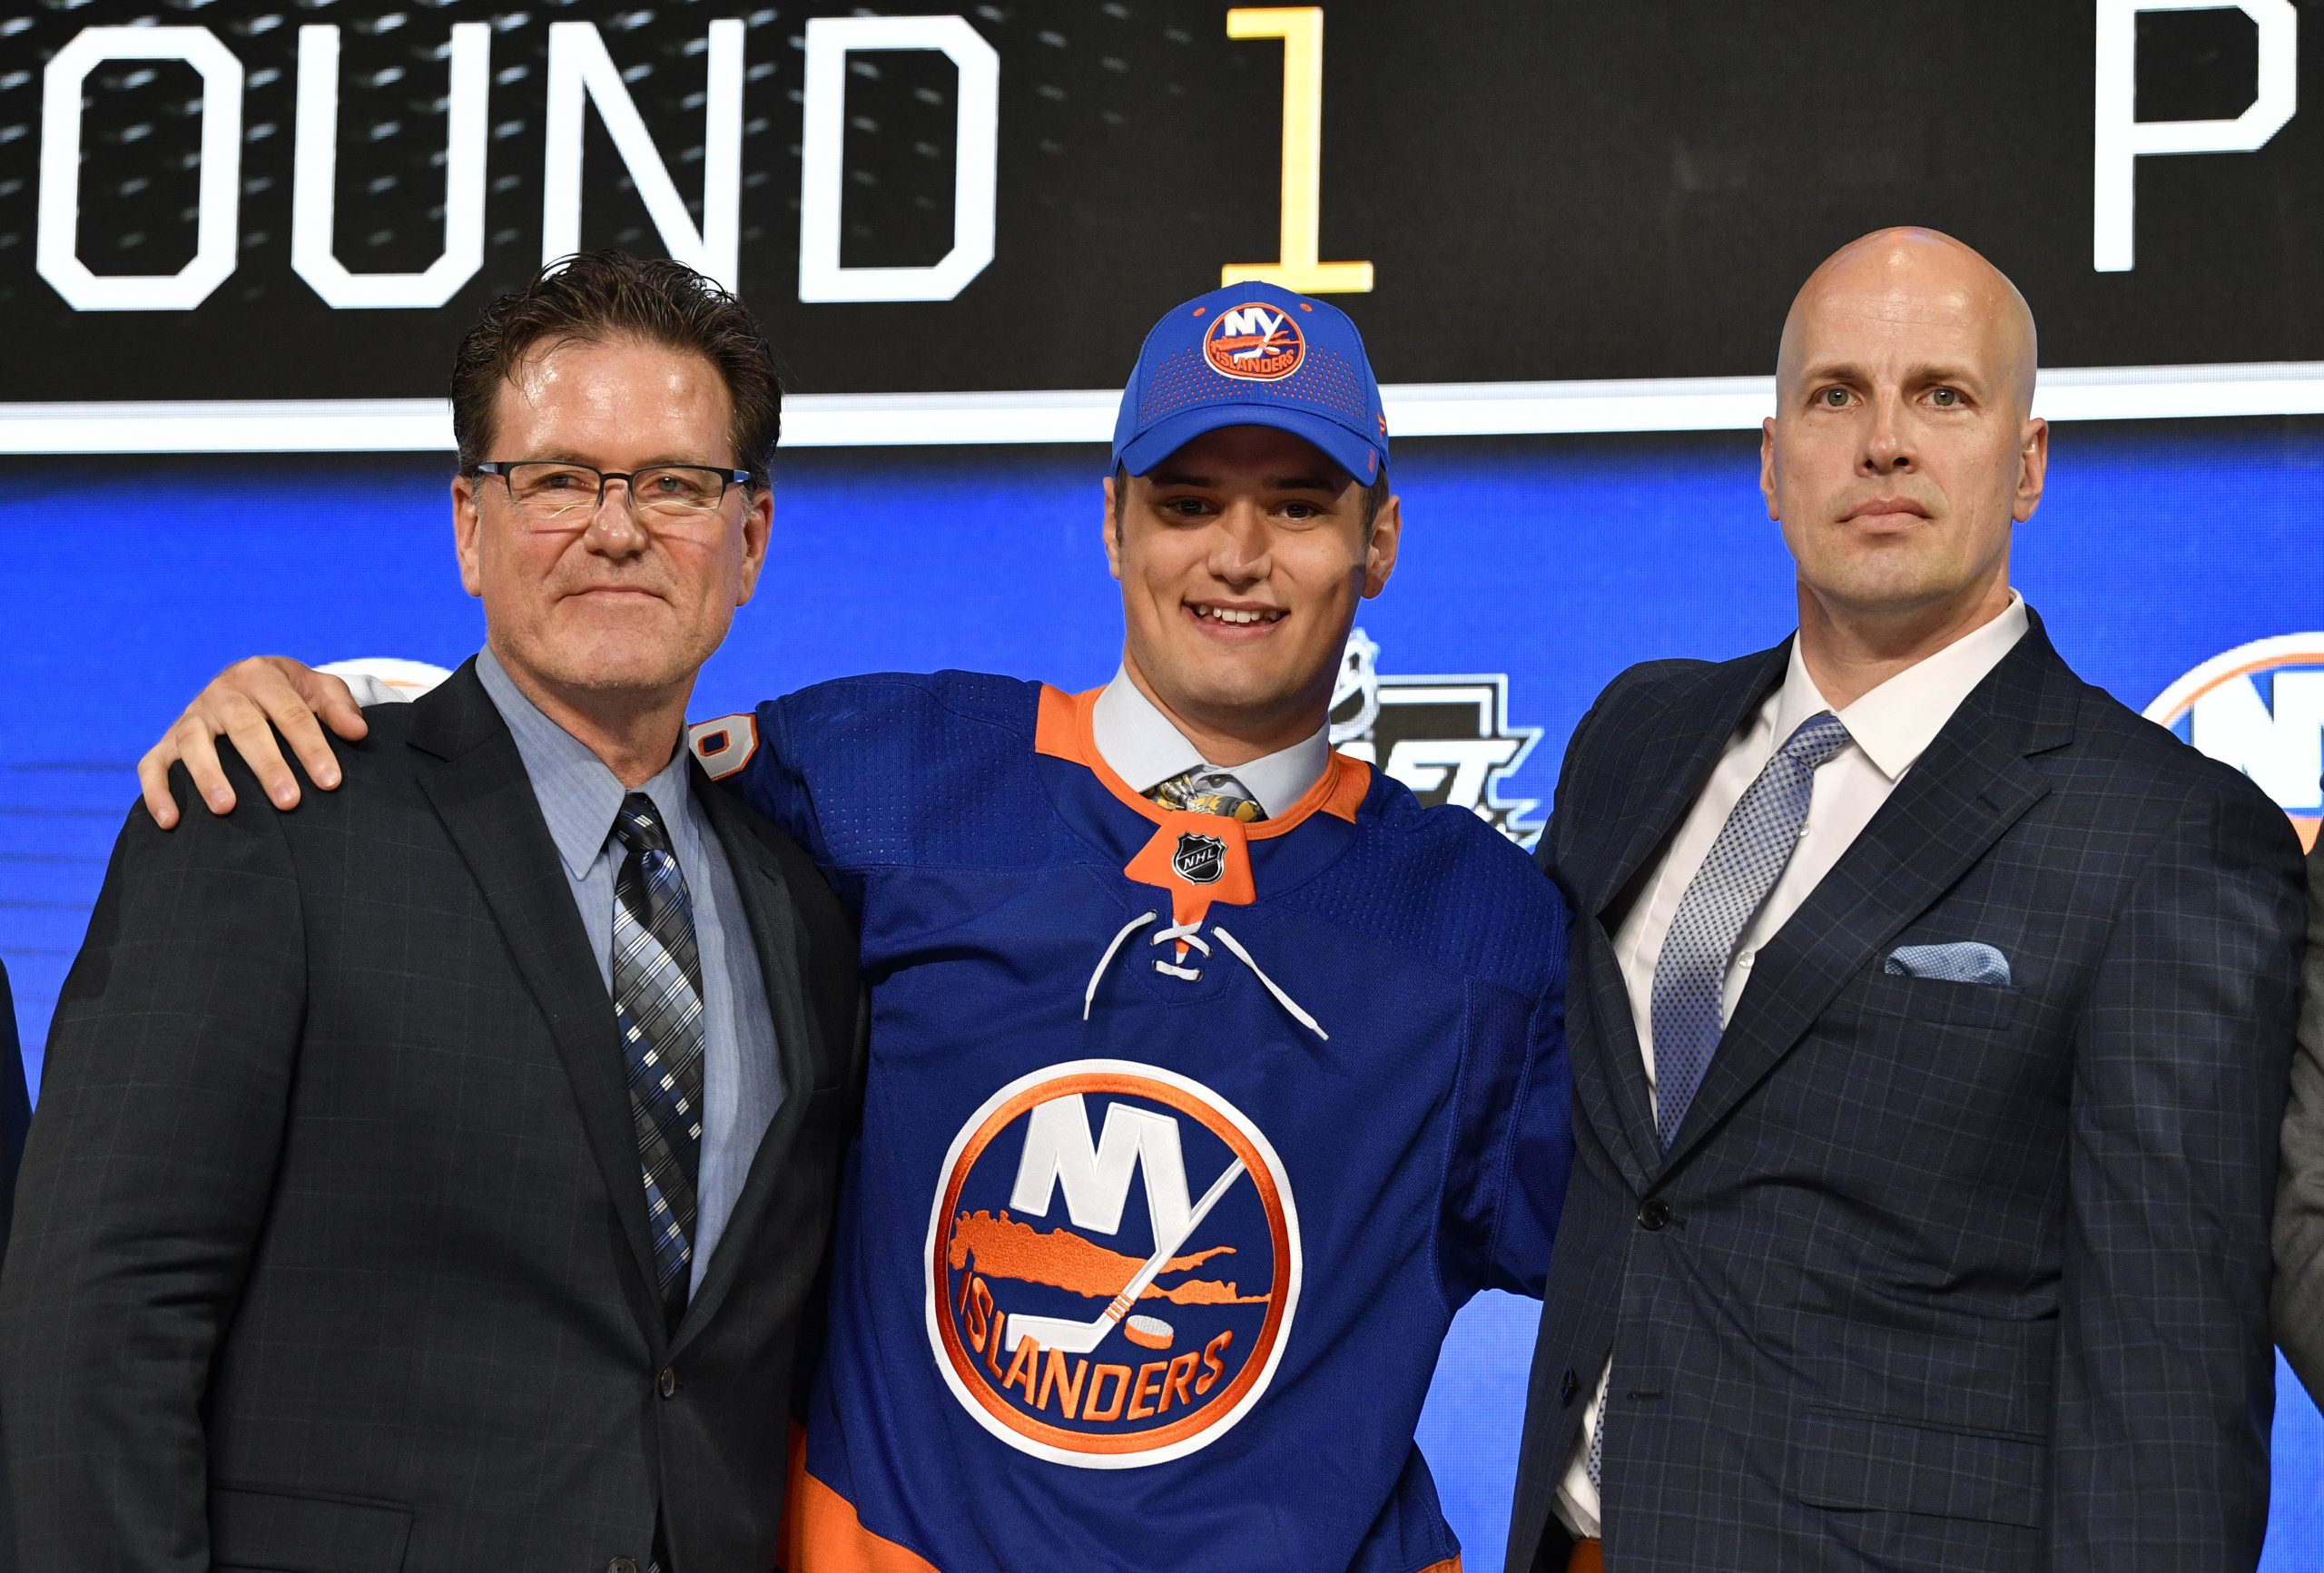 Jun 22, 2018; Dallas, TX, USA; Oliver Wahlstrom poses for a photo with team representatives after being selected as the number eleven overall pick to the New York Islanders in the first round of the 2018 NHL Draft at American Airlines Center. Mandatory Credit: Jerome Miron-USA TODAY Sports